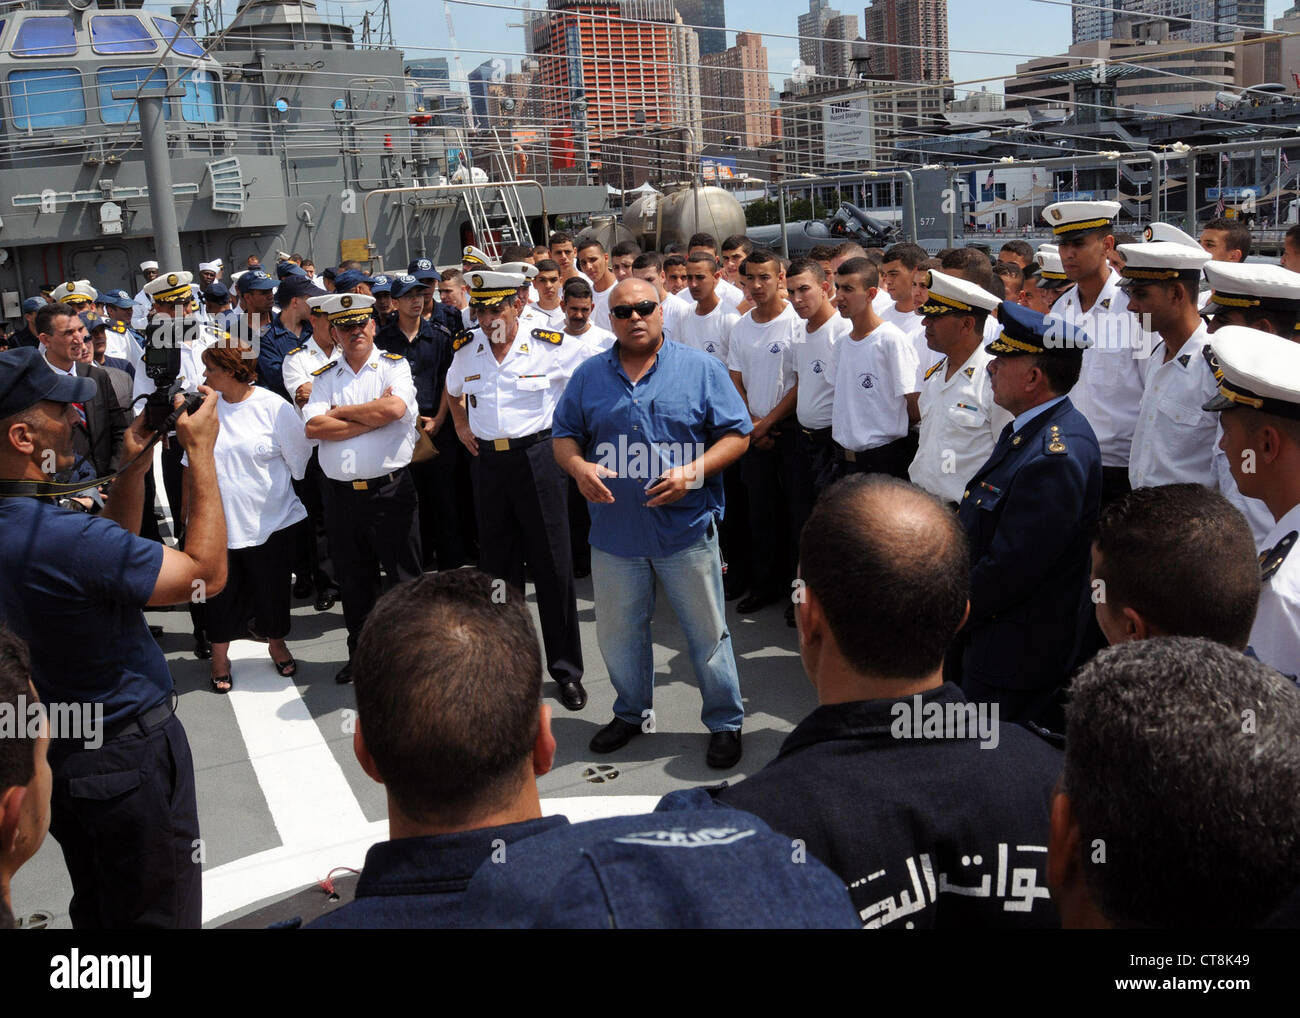 Detective Inspector Frank D'Arsillo from the New York Police Department conducts a safety brief for the crew of Algerian navy ship Soummam (937), as part of their port visit. This marks the first time an Algerian navy ship has visited the United States. During their visit, the Algerian crew will tour the city and conduct office calls with city and government officials. The Soummam transited the Atlantic from Algeria as part of a training mission for Algerian naval academy students. Stock Photo